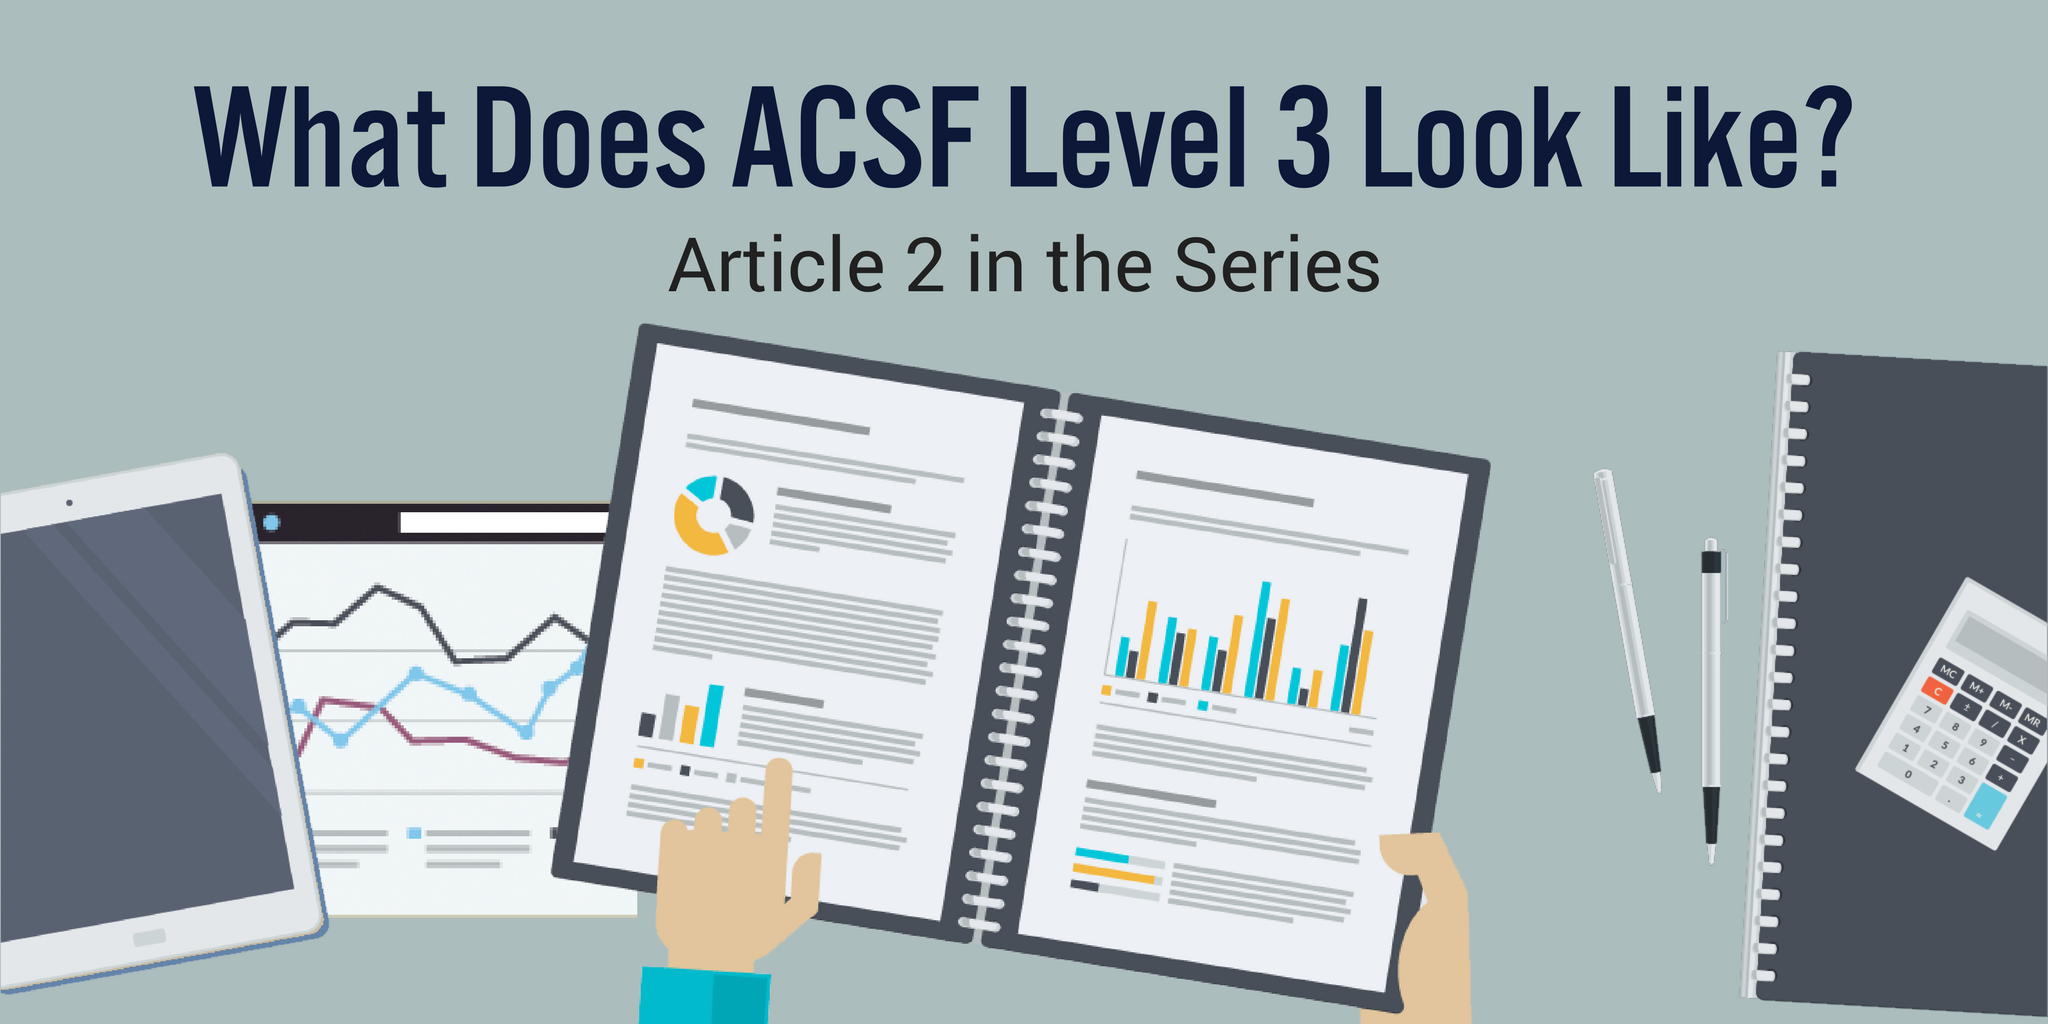 What Does ACSF Level 3 Look Like?